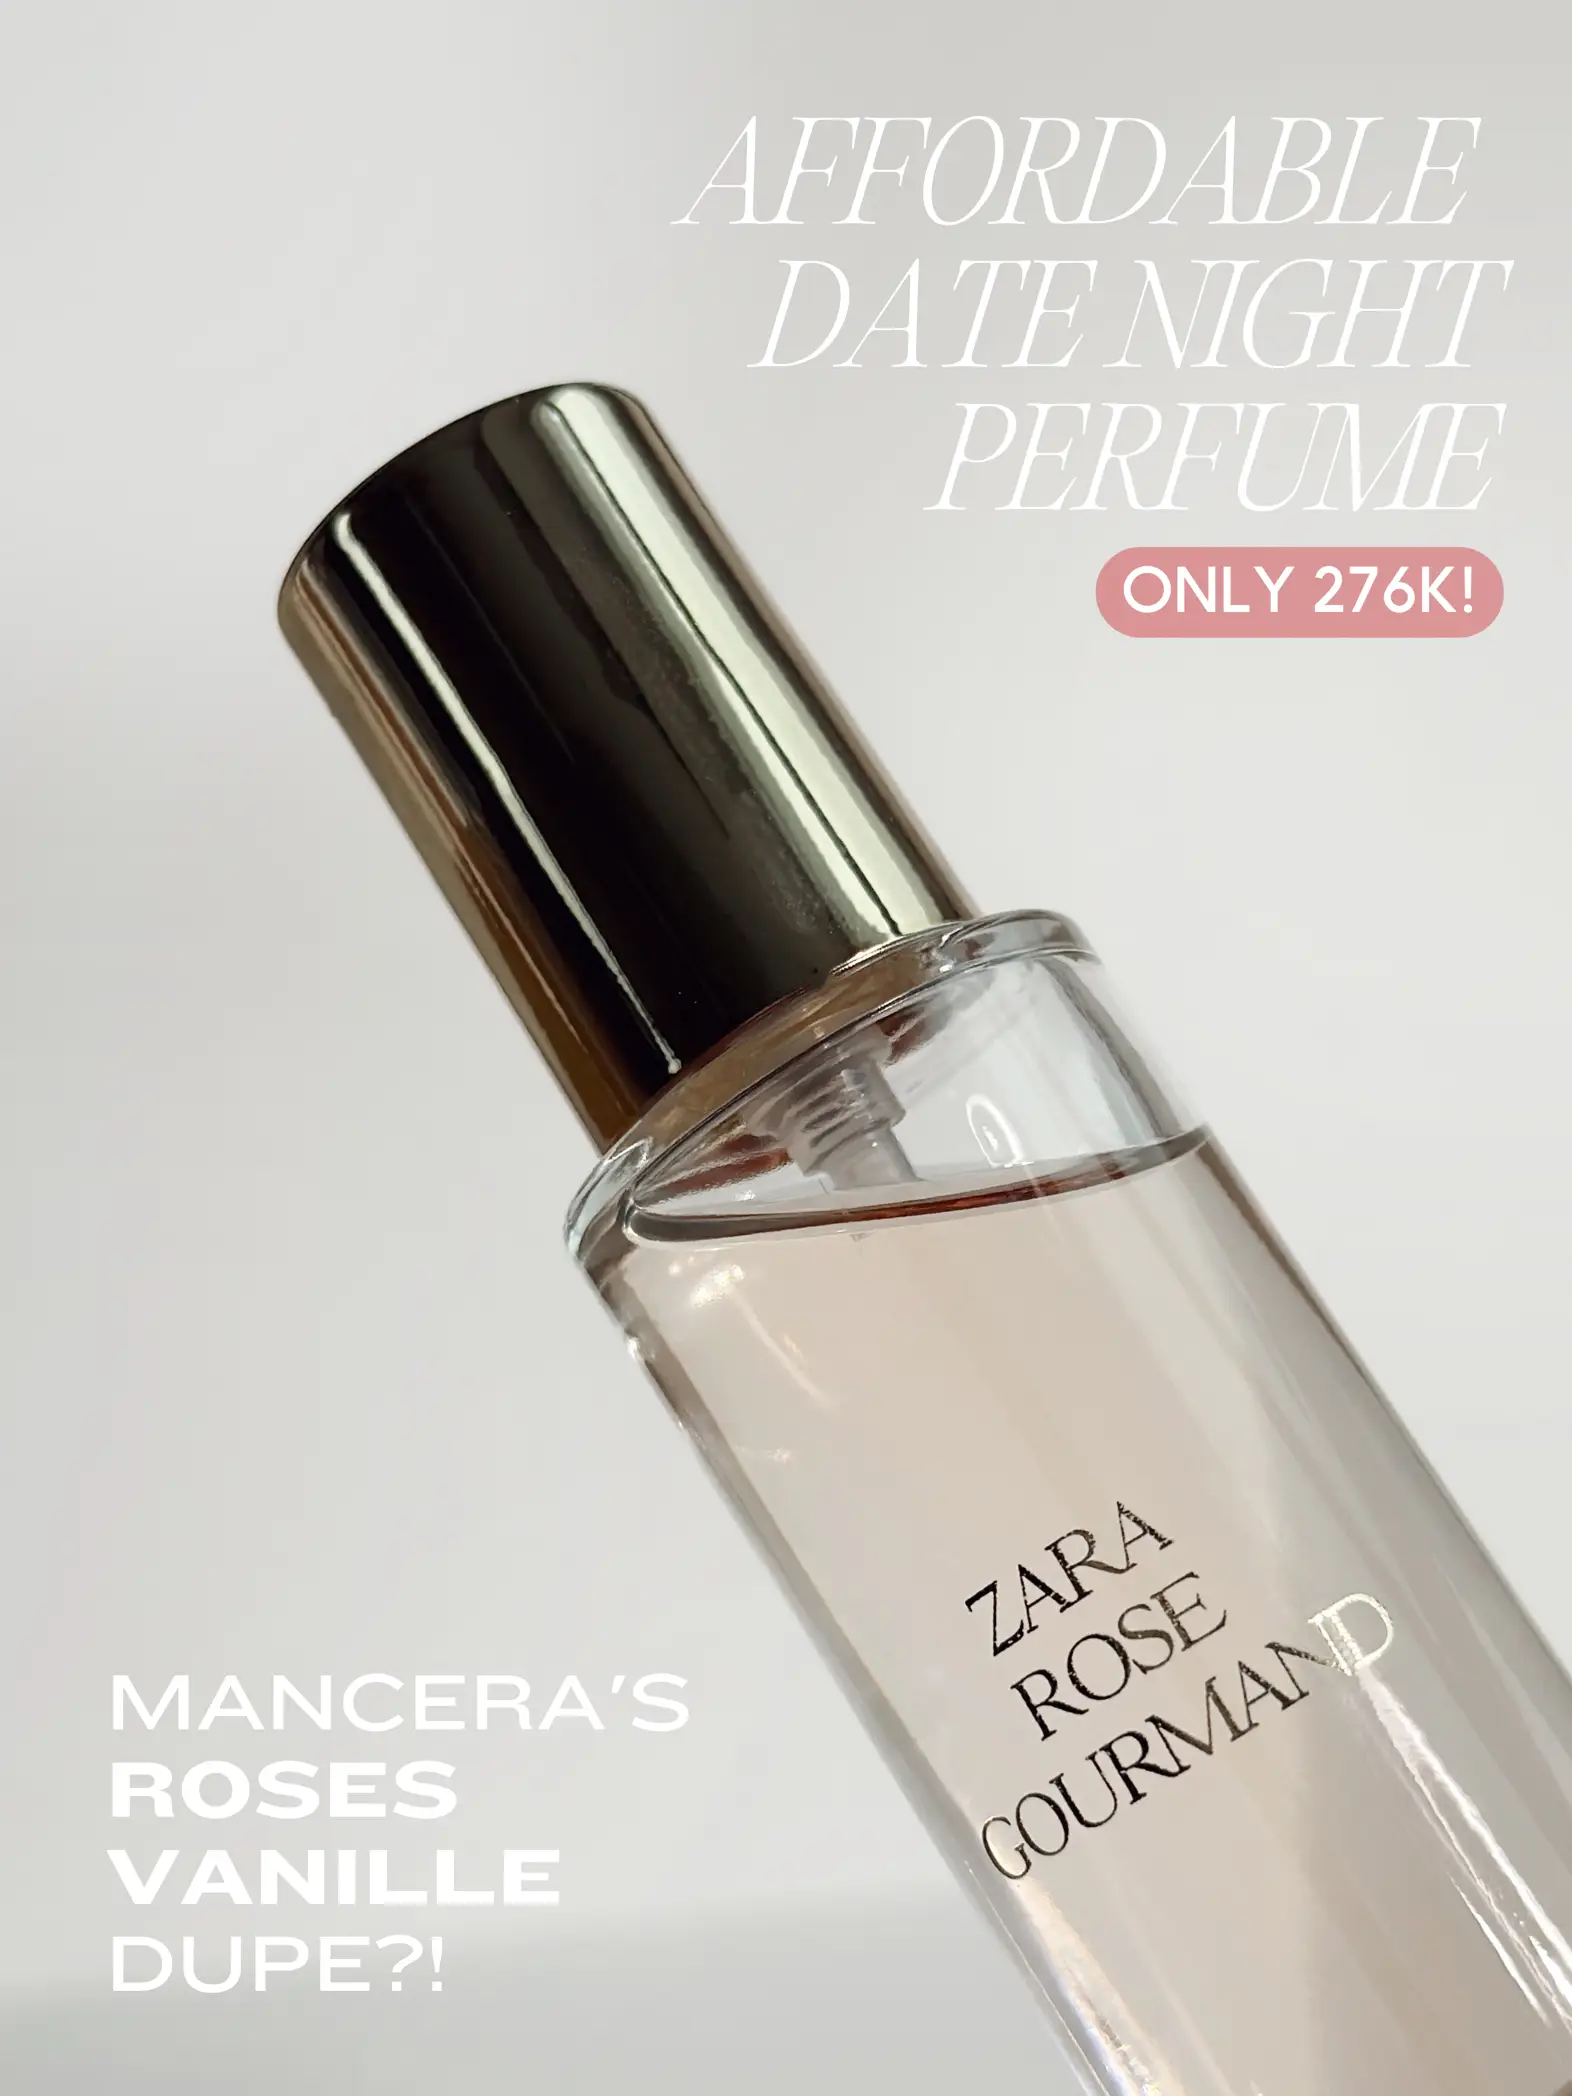 Review, I FOUND A GREAT DUPE FOR ROSES VANILLE BY MANCERA